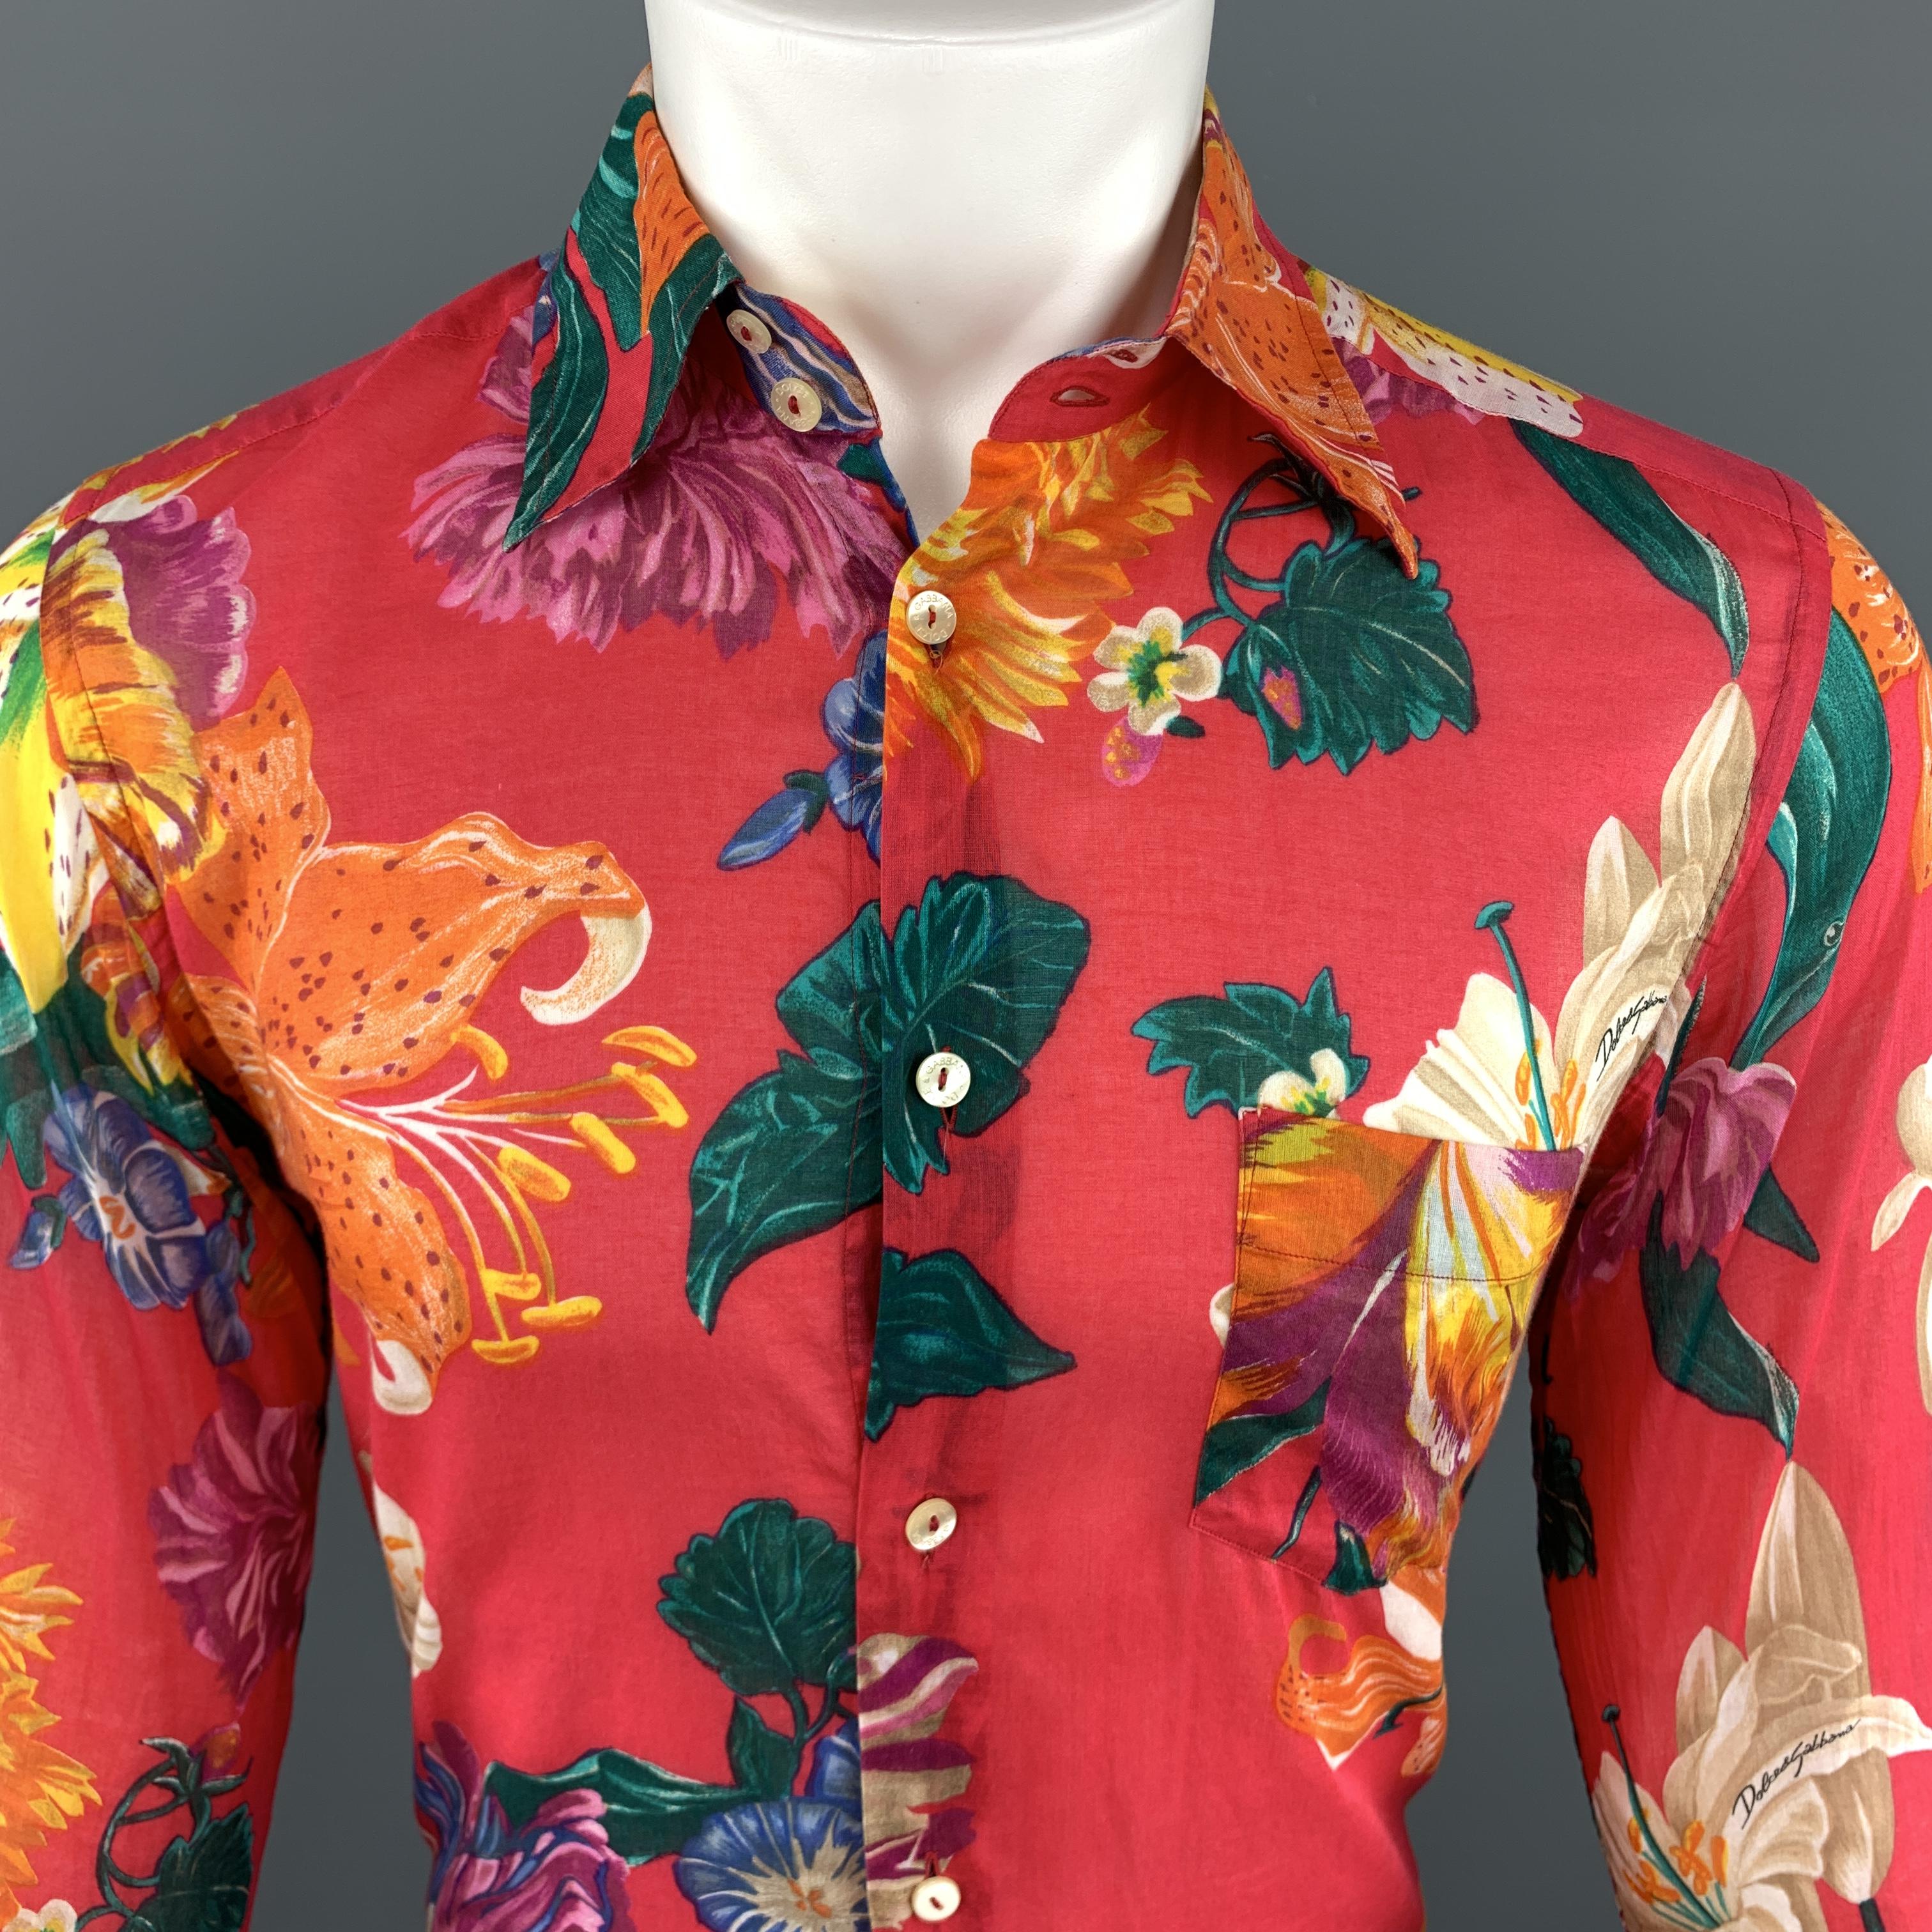 DOLCE & GABBANA Long Sleeve Shirt comes in a fuchsia tone in a floral print light weight cotton material, with a pointed collar, a patch pocket, double buttoned cuffs, button up. Made in Italy.

Excellent Pre-Owned Condition.
Marked: IT